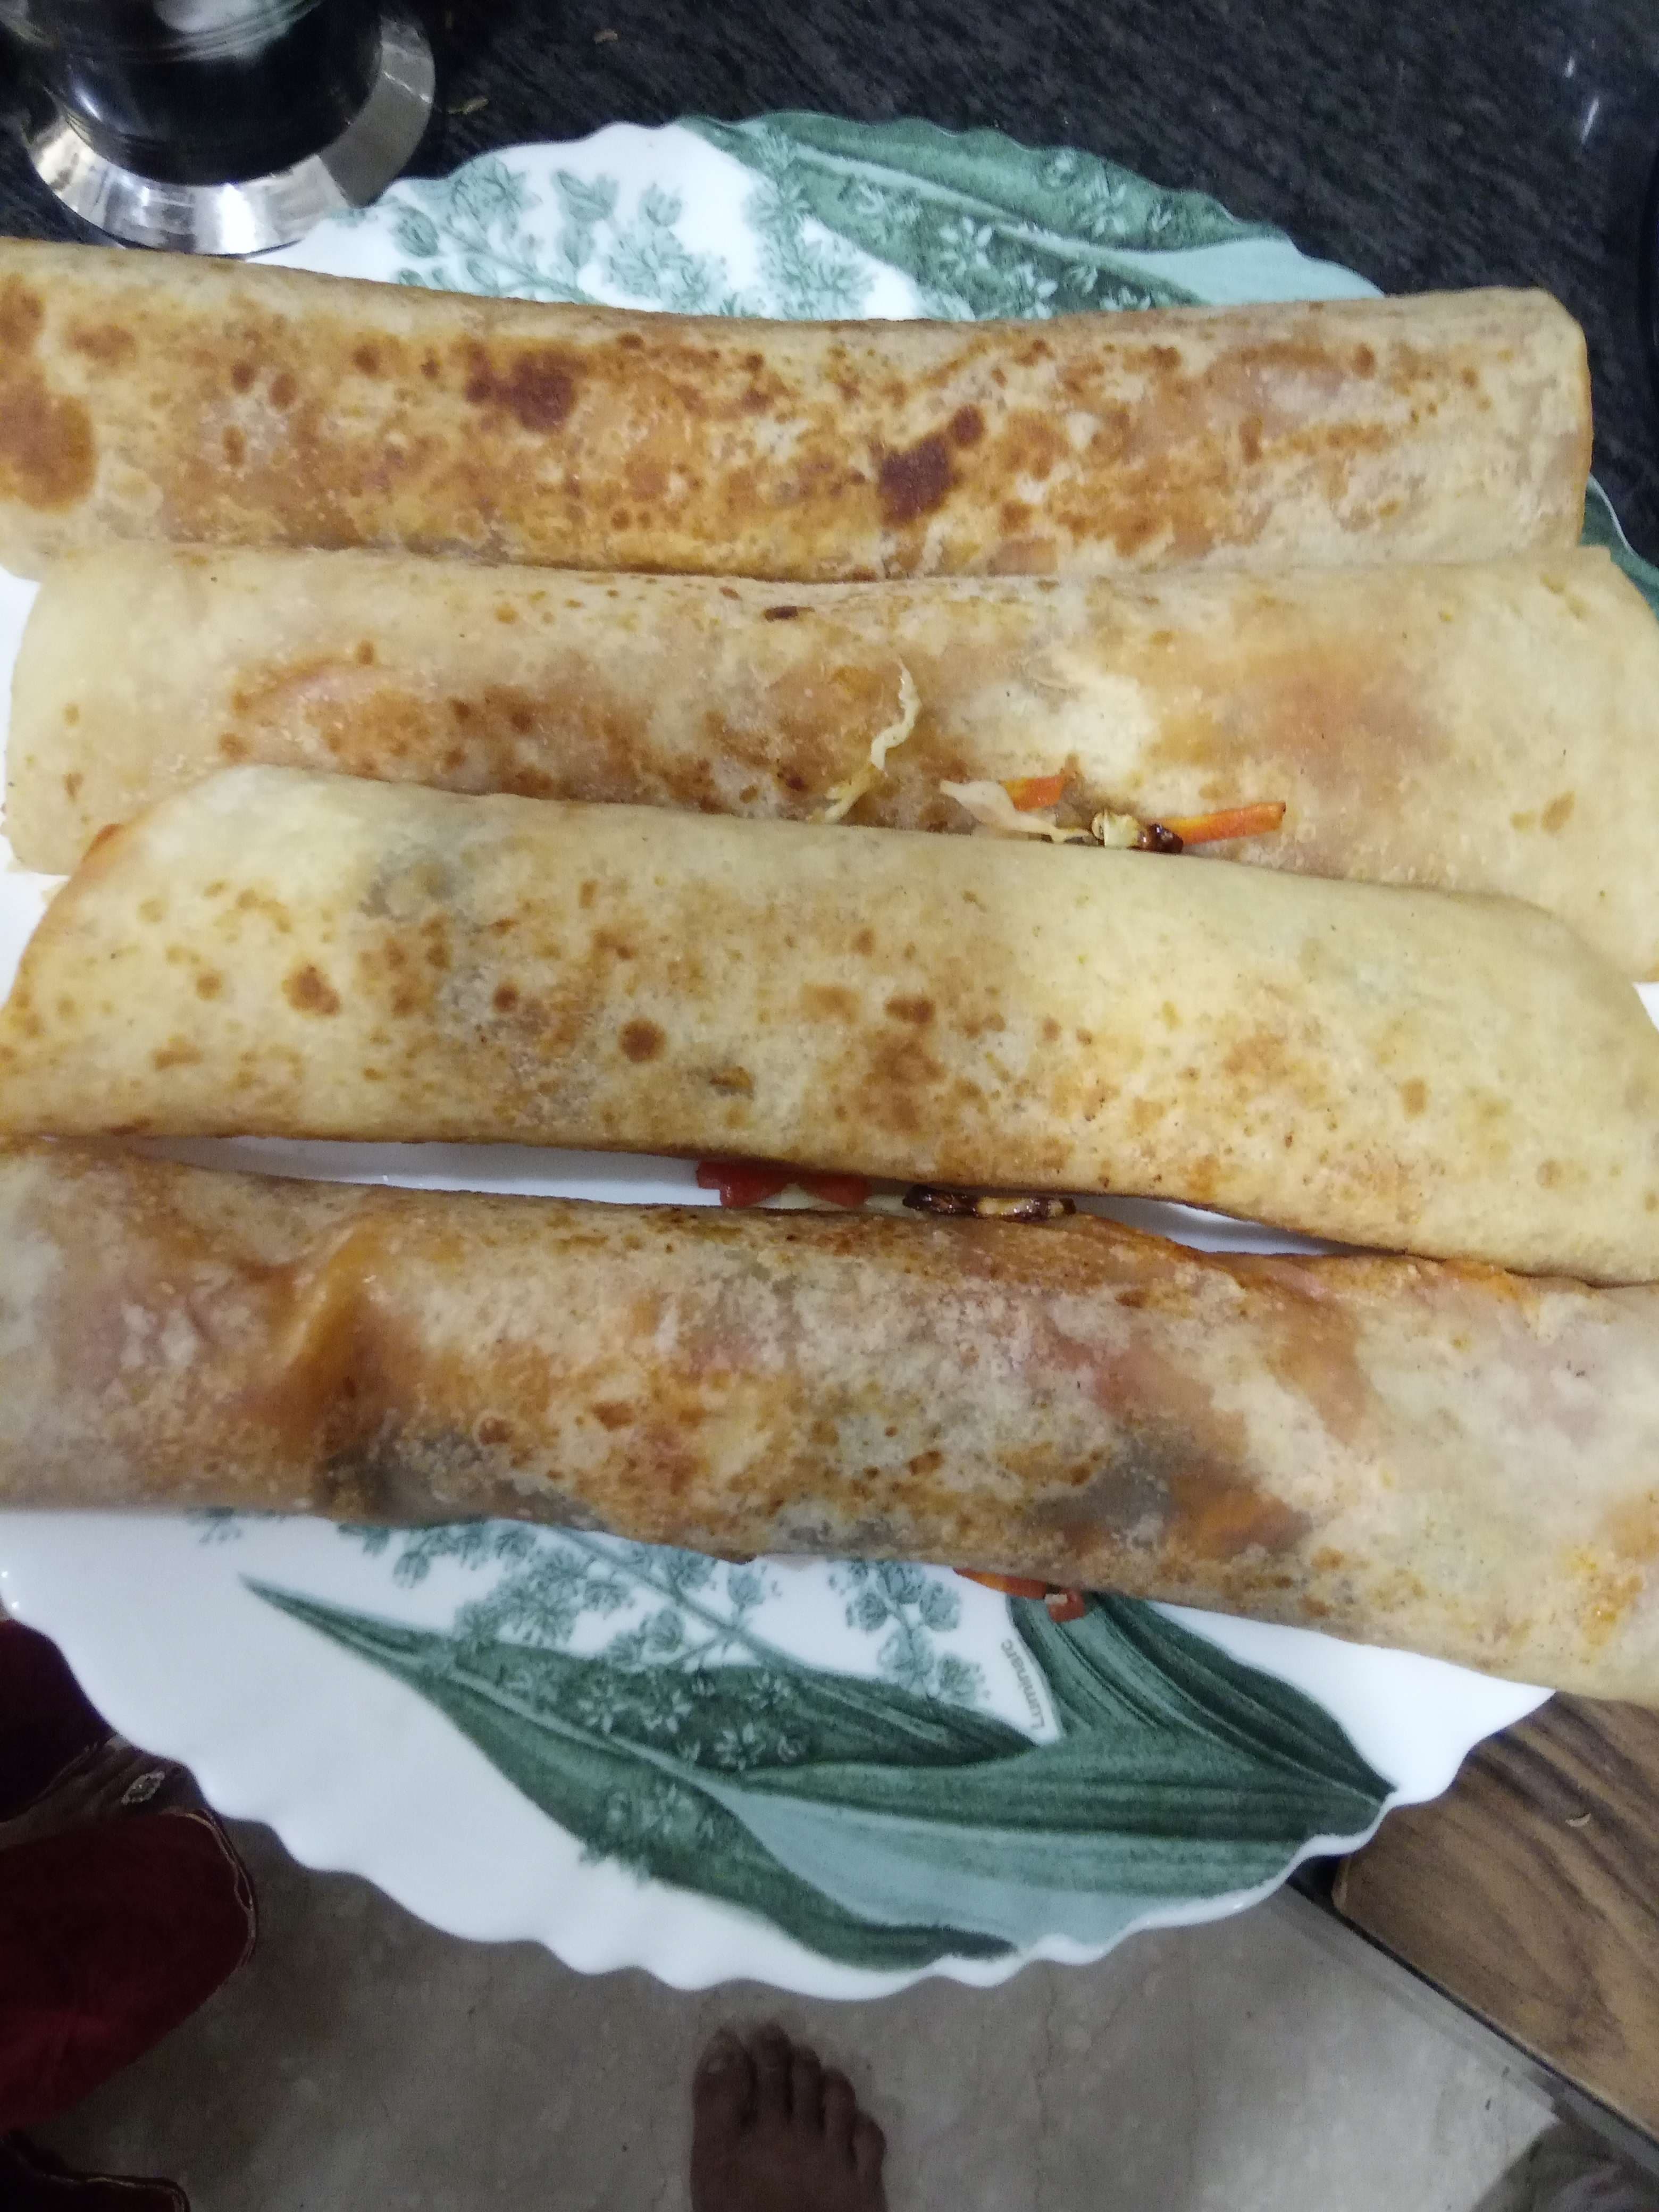 Tasty Veg Kathi Rolls cooked by COOX chefs cooks during occasions parties events at home